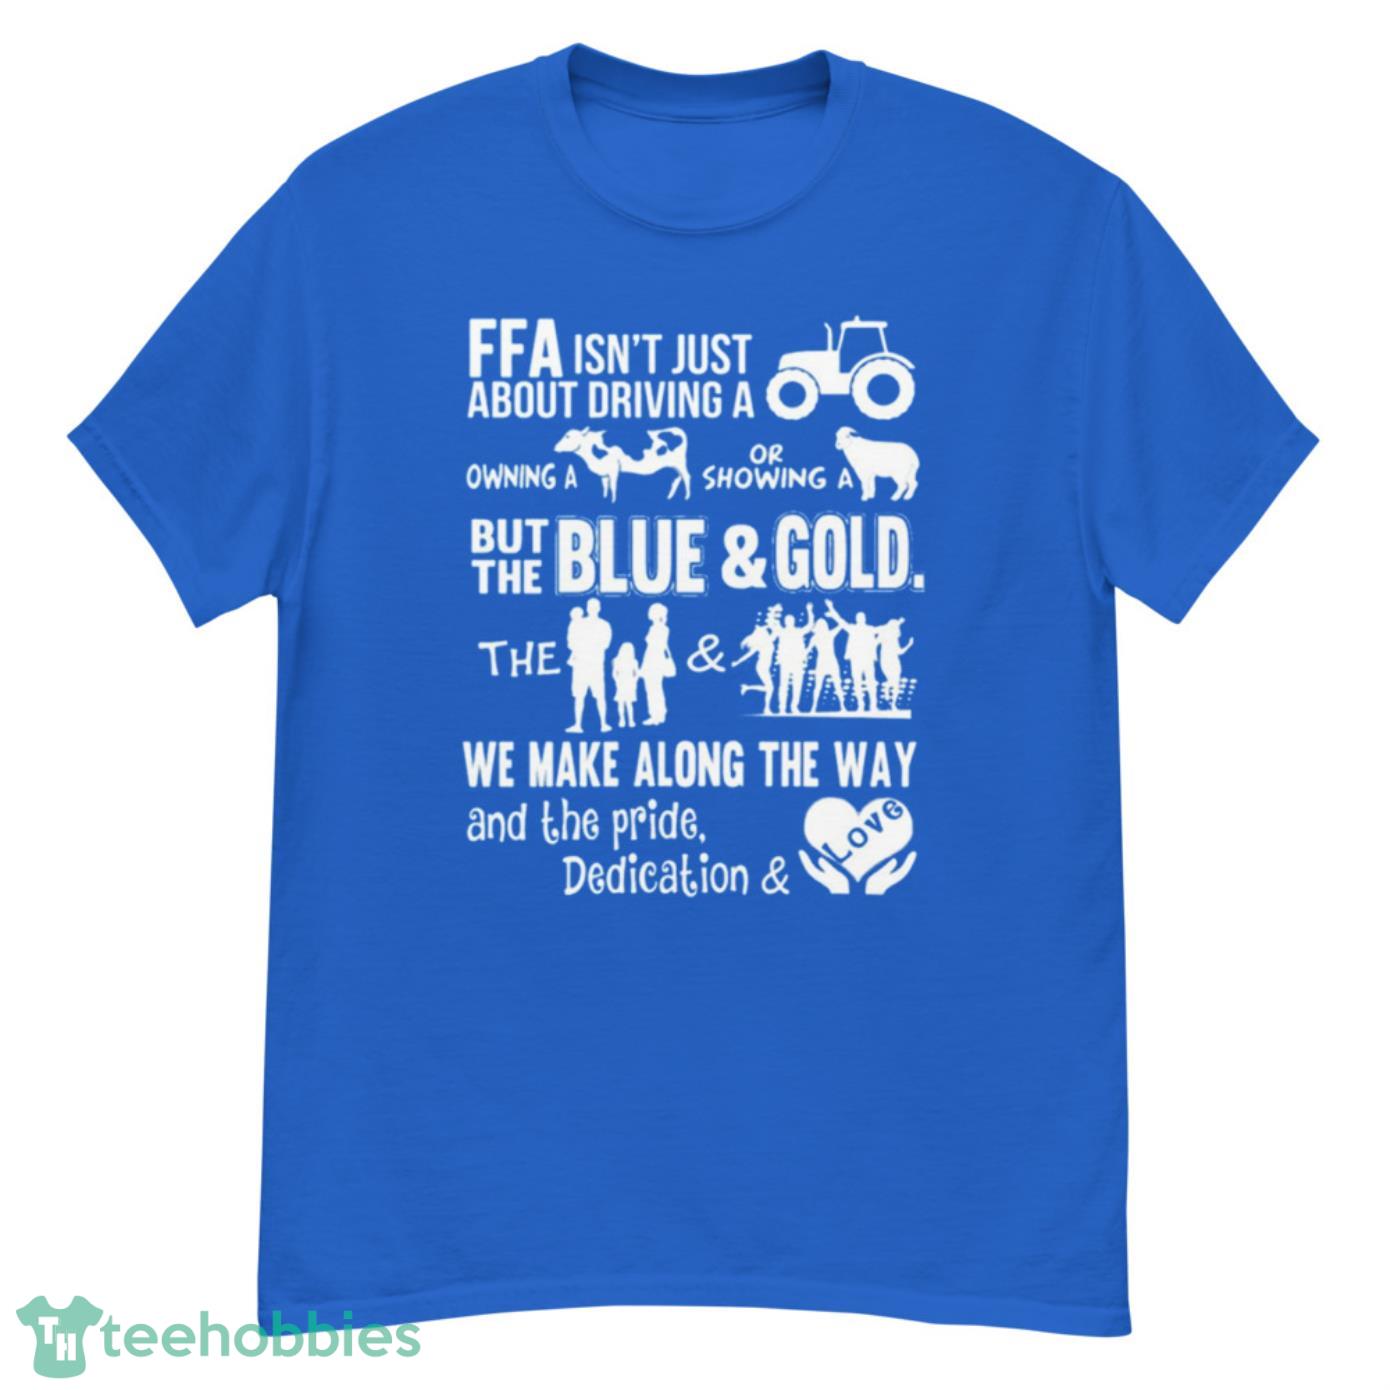 FFA Isn't Just About Driving A Tractor Owning A Cow, But The Blue & Gold FFA Shirt - G500 Men’s Classic T-Shirt